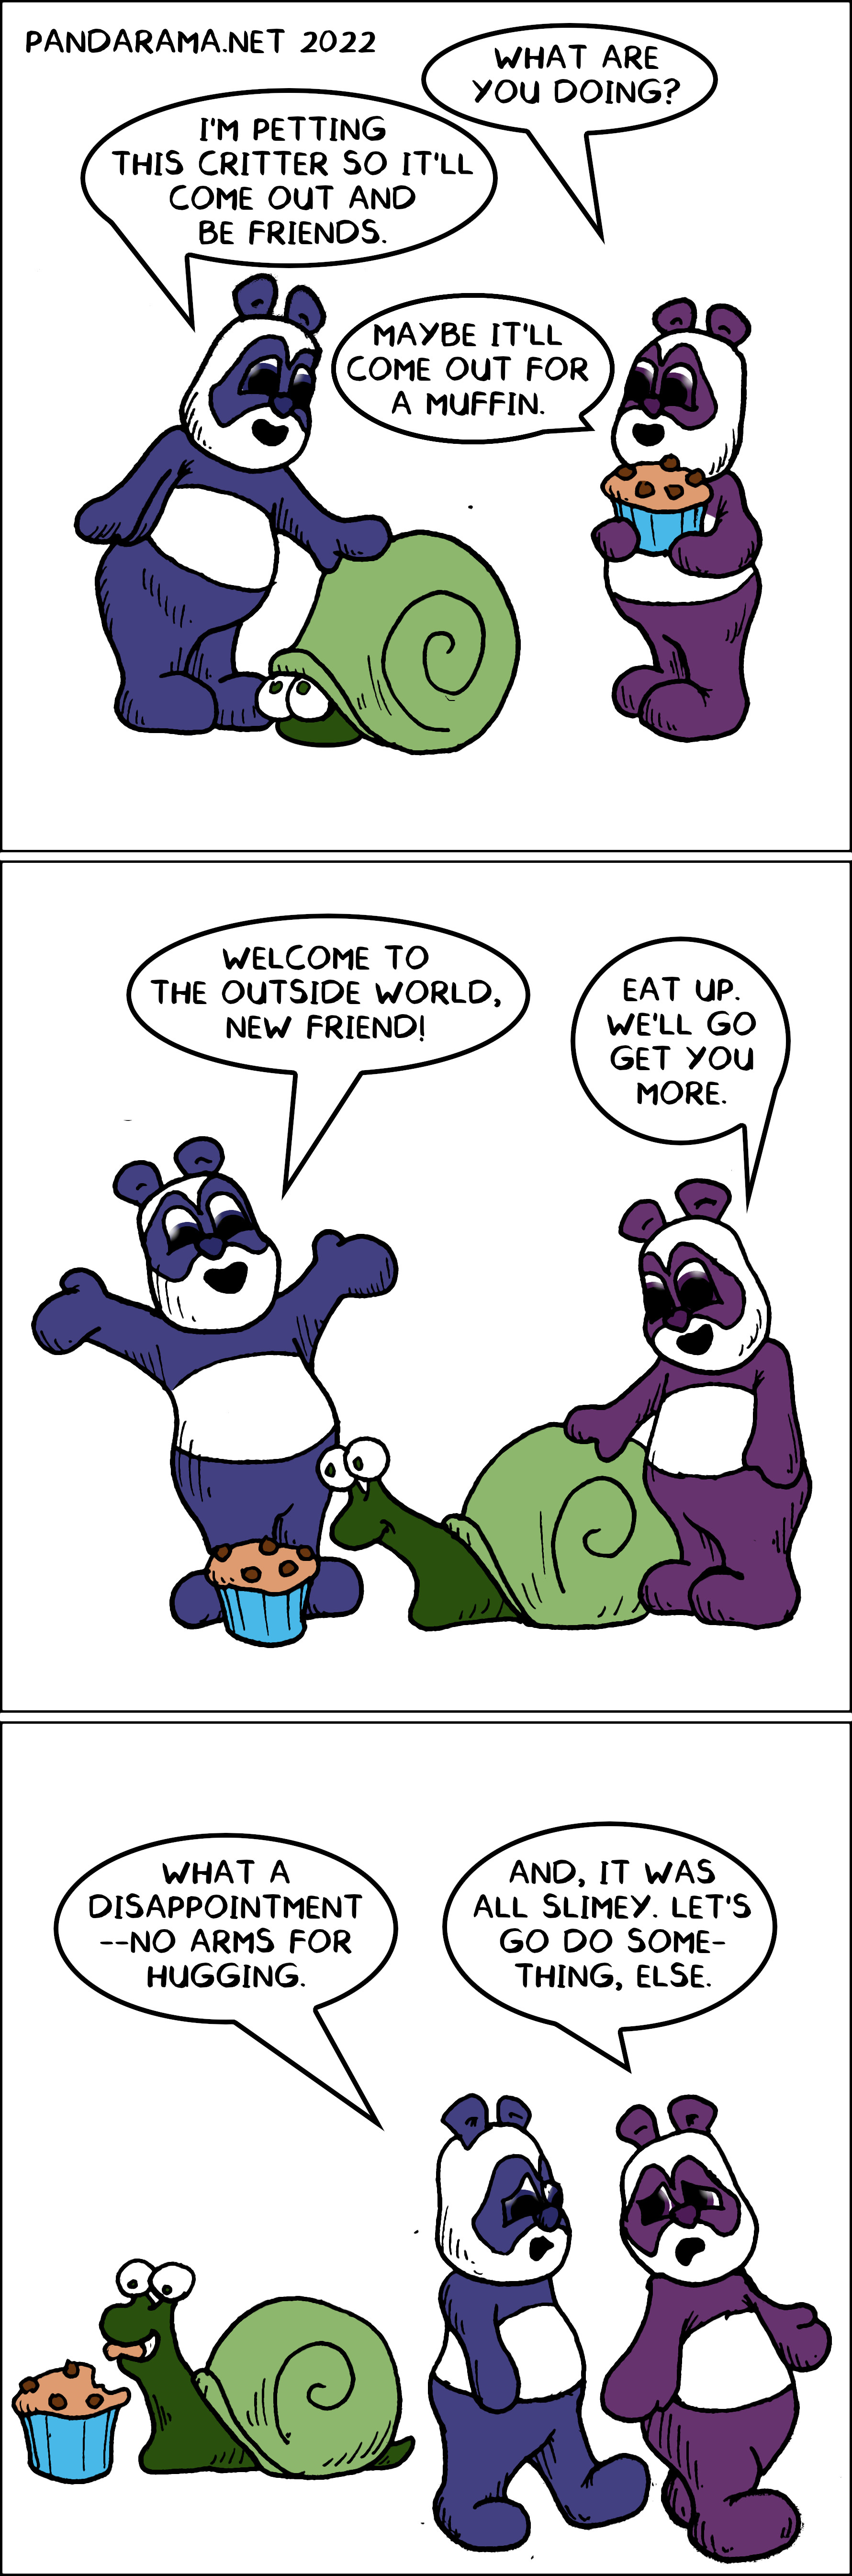 pandarama cartoon. A snail is lured from its shell with promises of friendship and then is rejected for being a snail